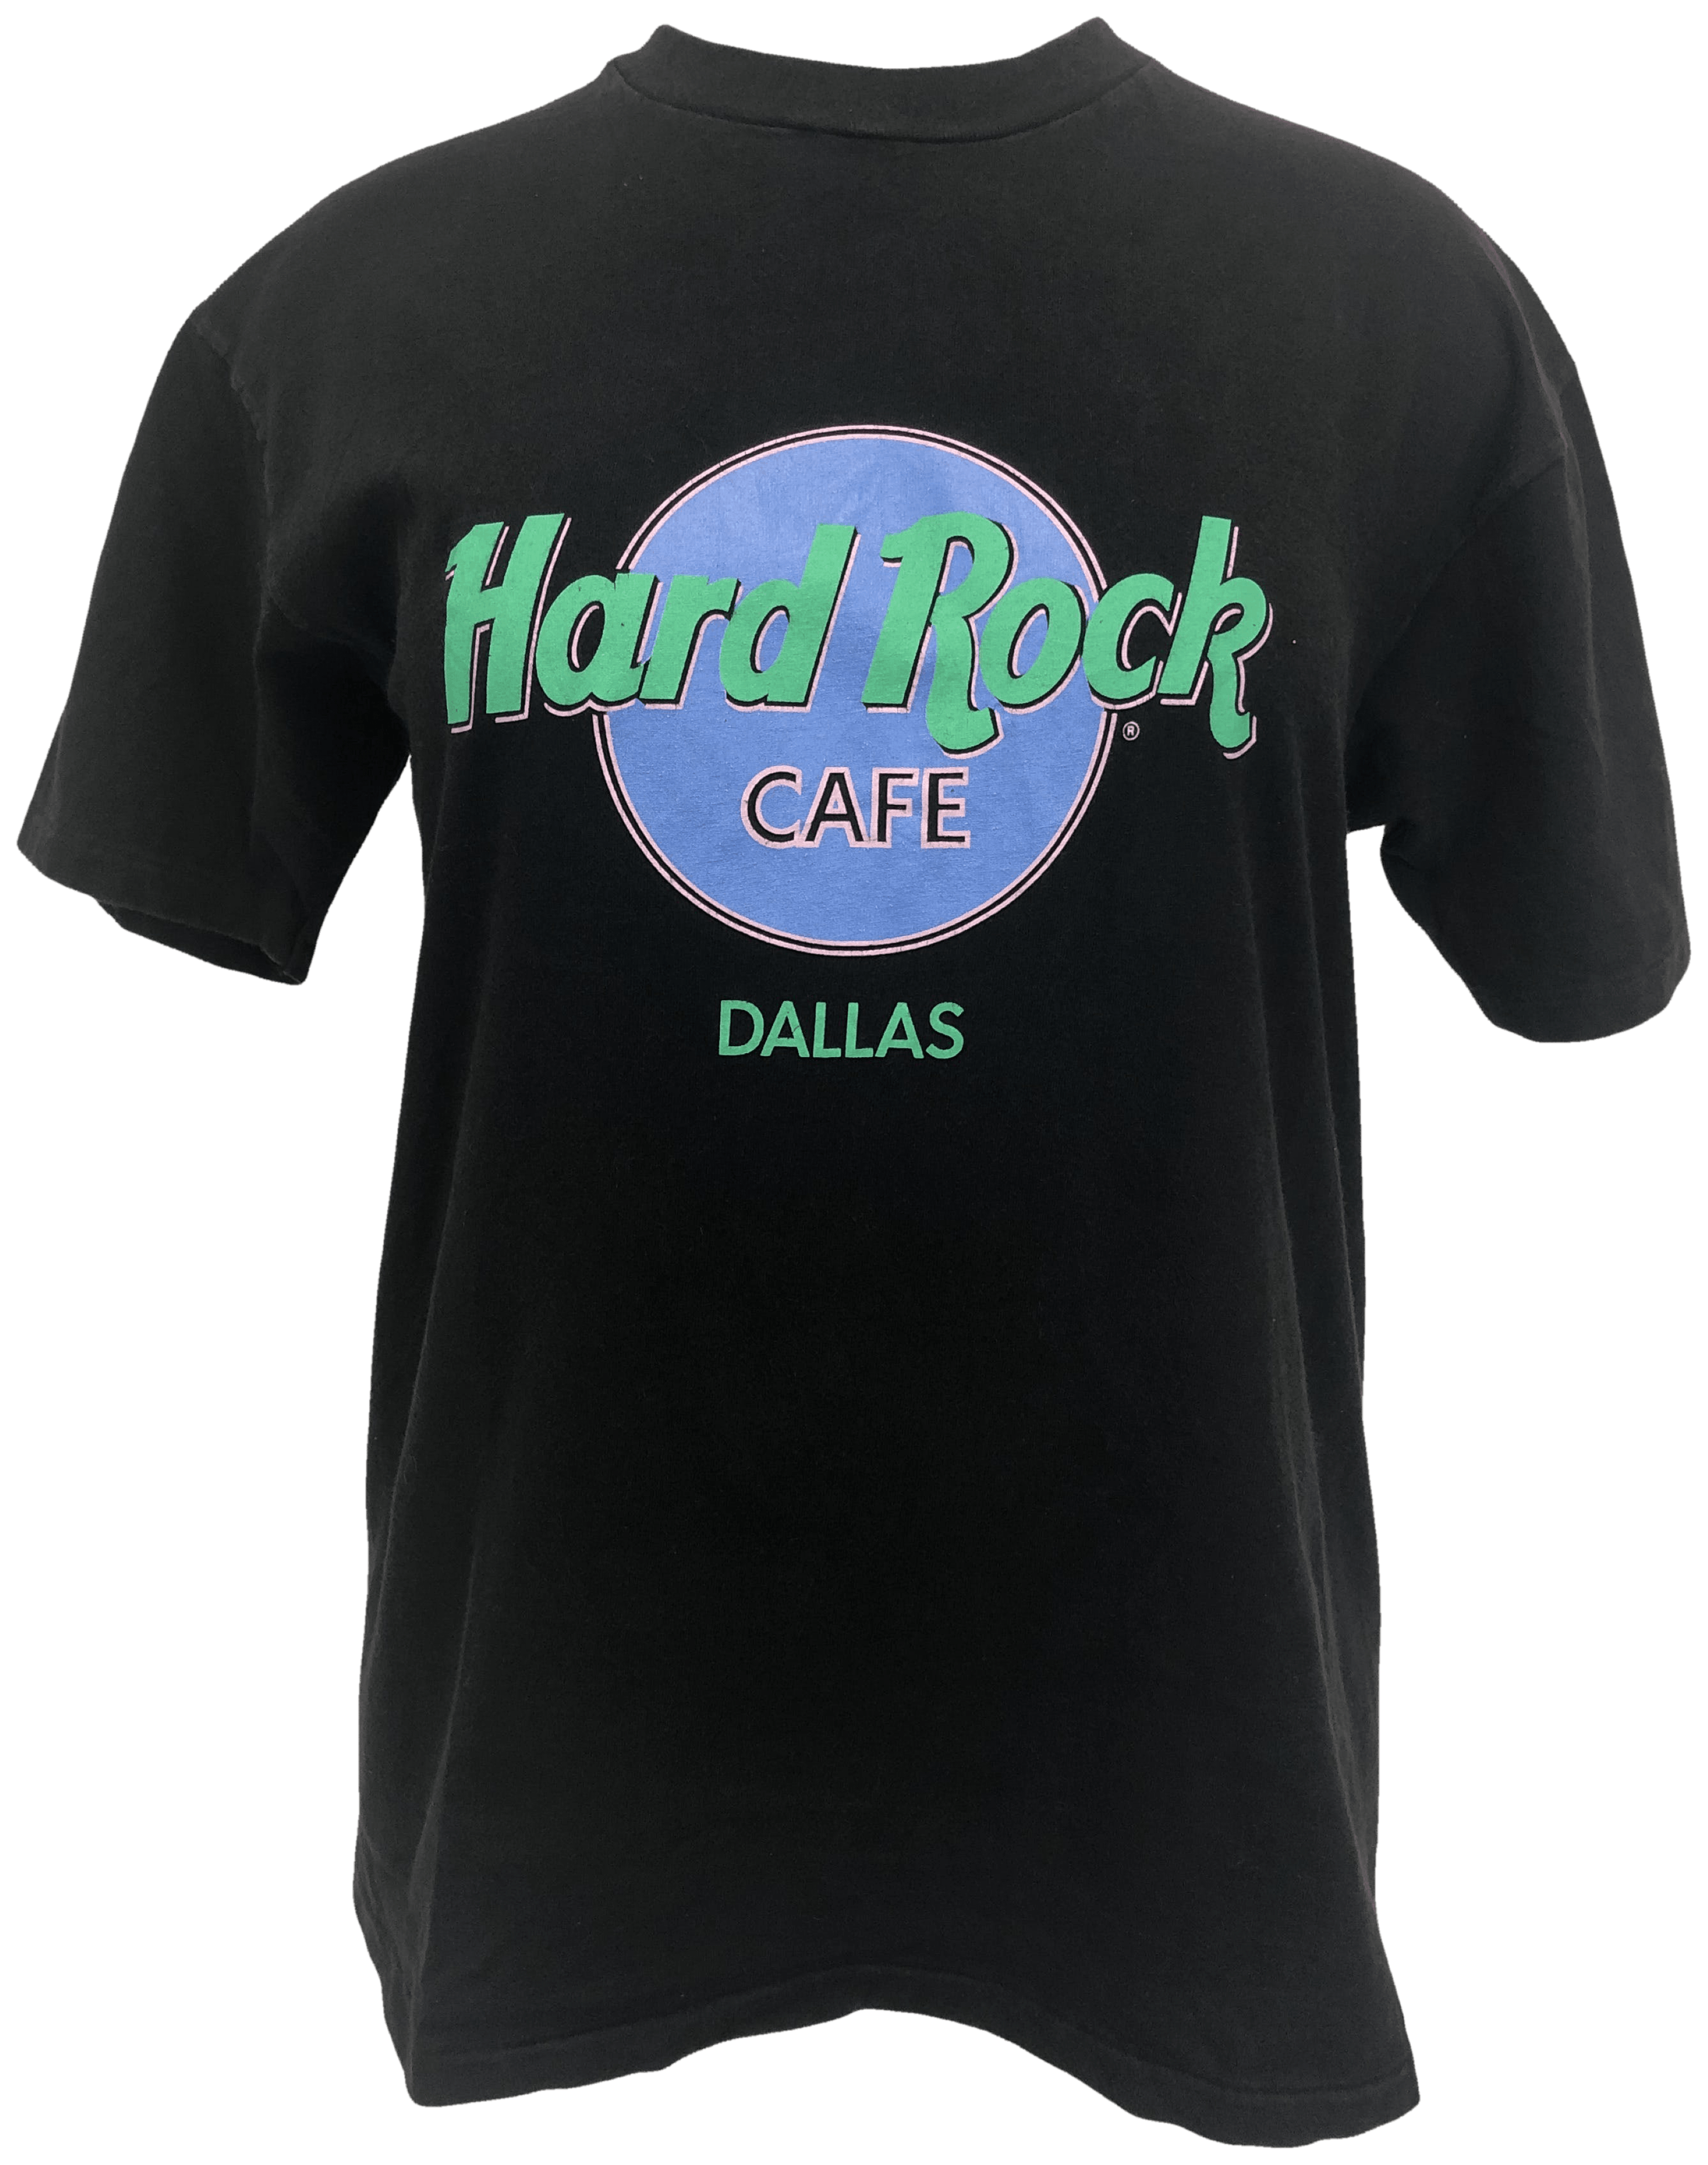 Hard Rock Cafe Dallas Graphic T Shirt By Hanes Awoke Vintage Thrilling